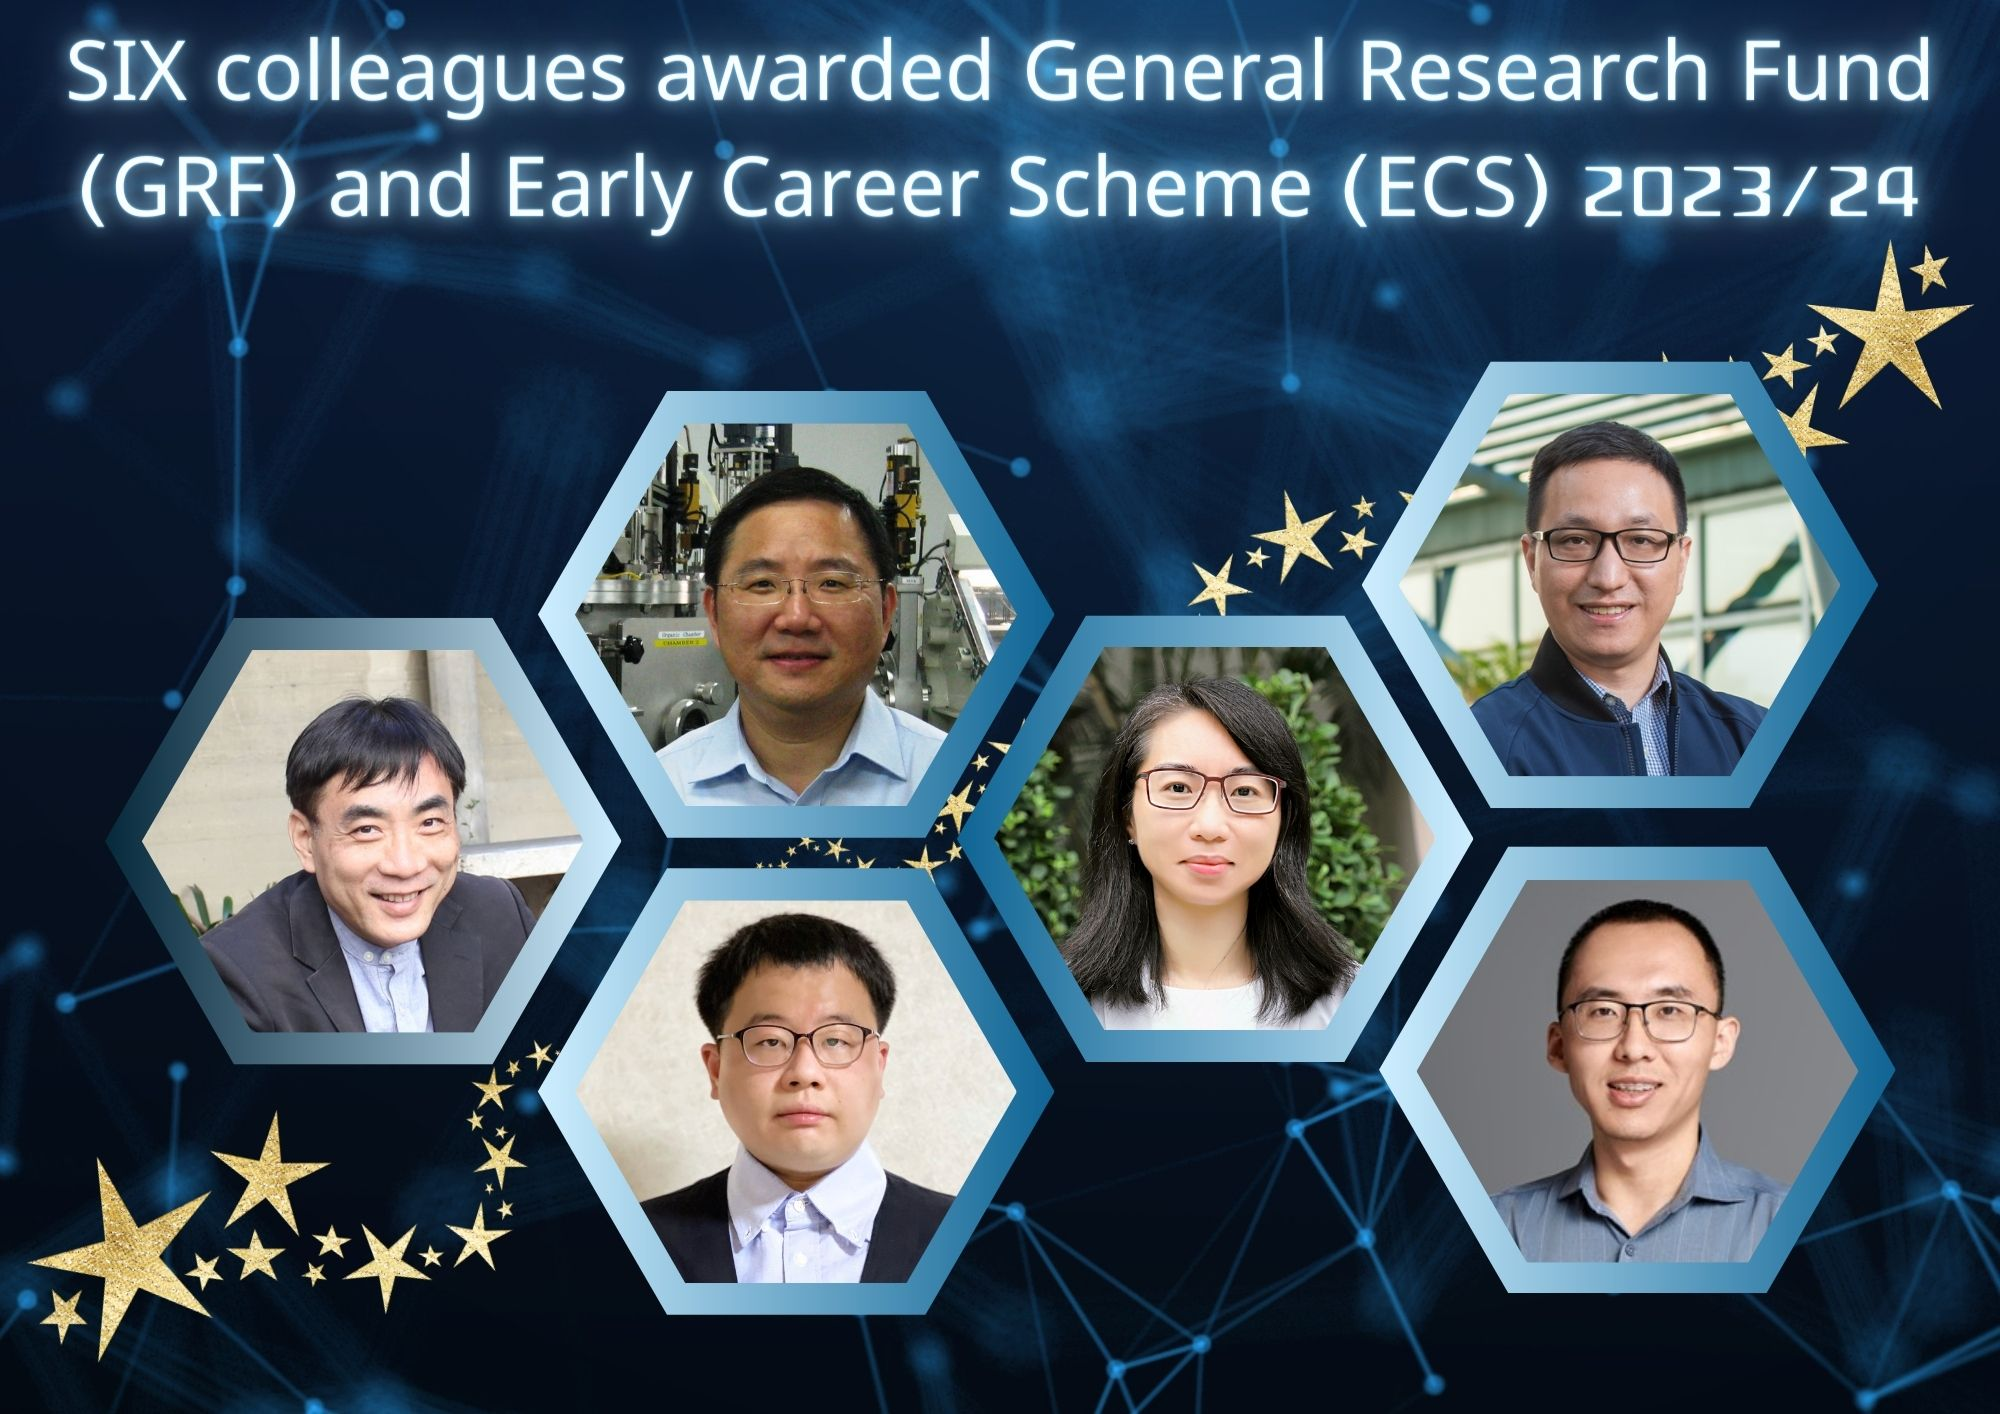 Congratulations to SIX colleagues awarded General Research Fund (GRF) and Early Career Scheme (ECS) 2023/24